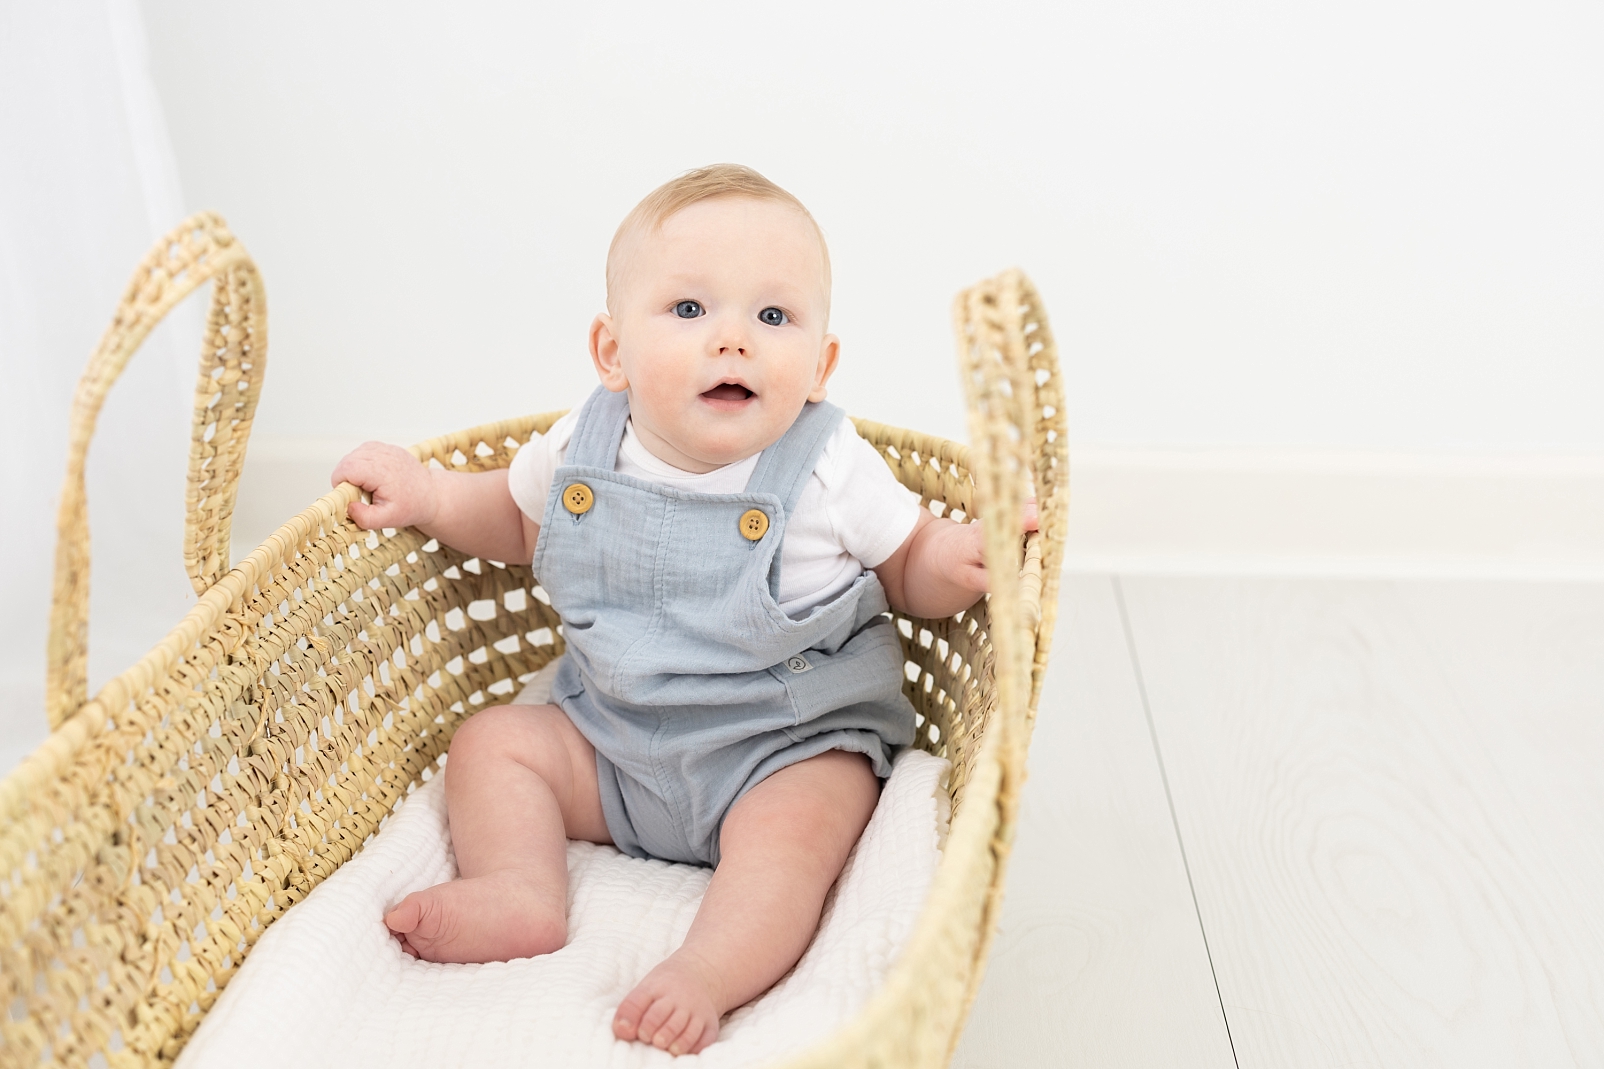 7 months milestone portraits of baby boy in light blue overalls in a basket
